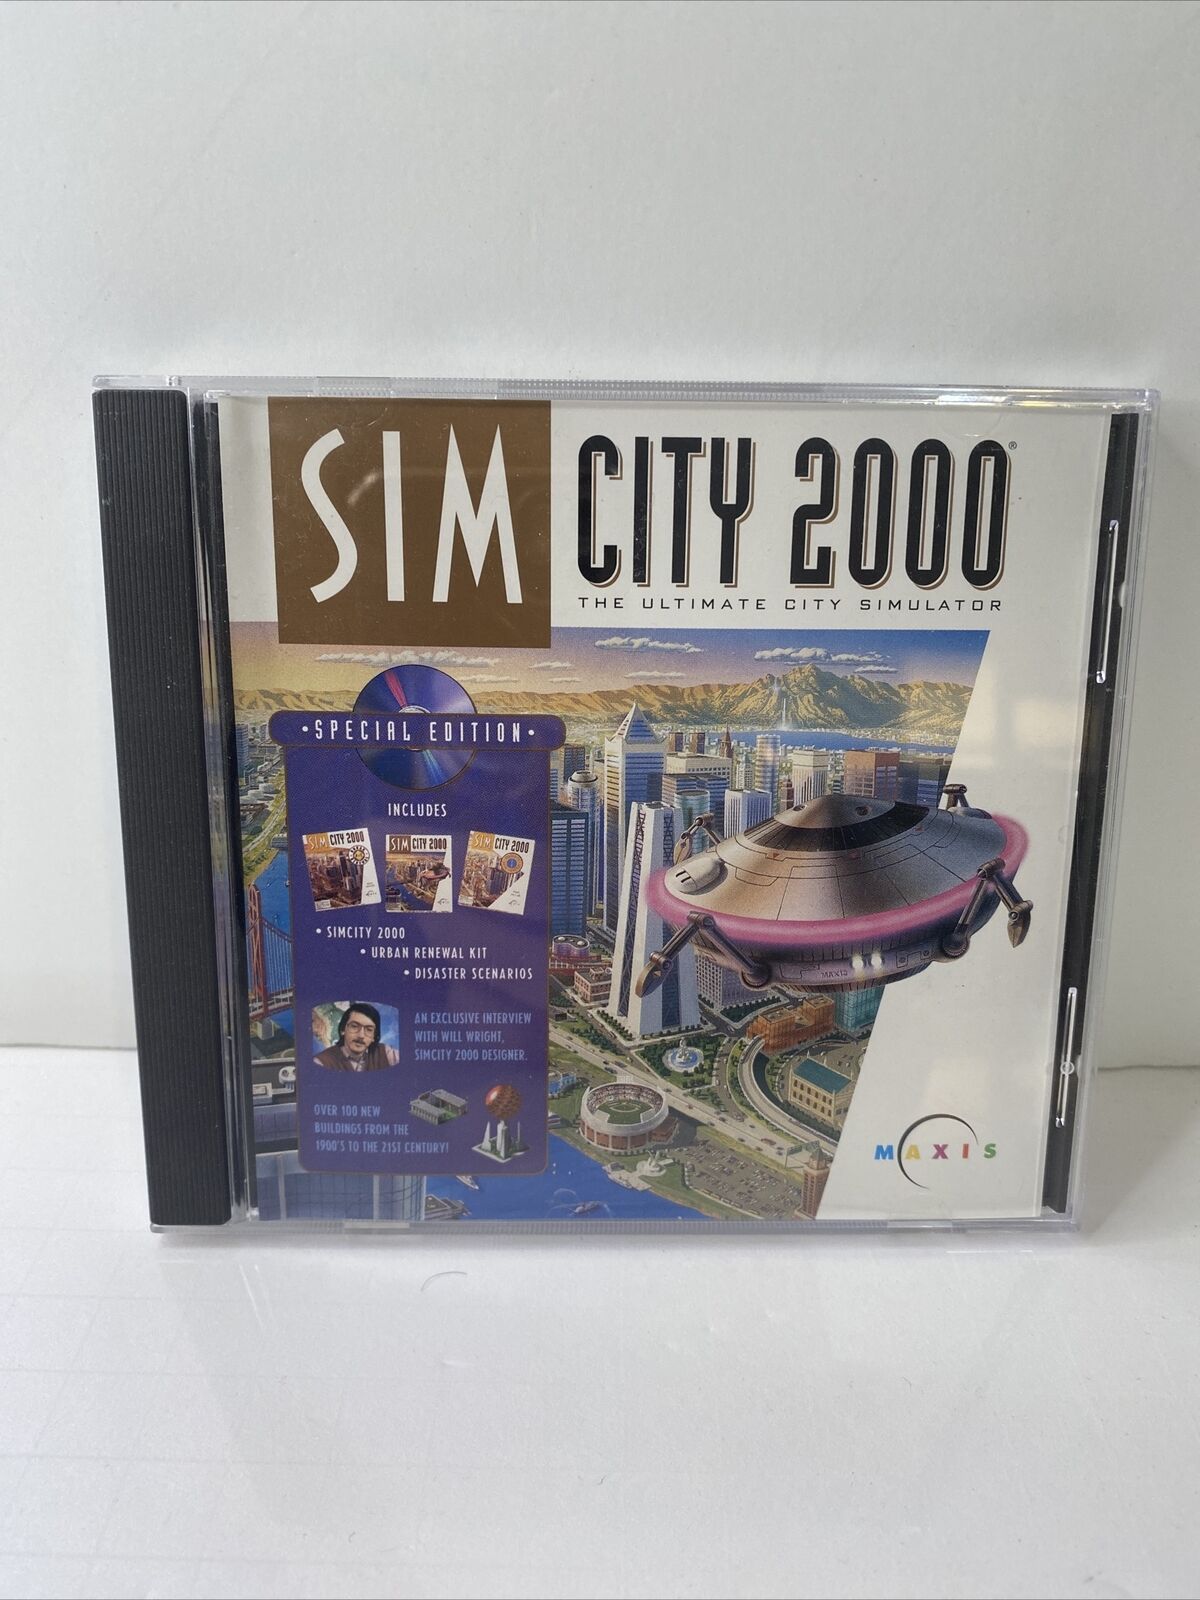 Simcity 2000: Special Edition (pc, 1995) Win 95 Ea Maxis New Sealed